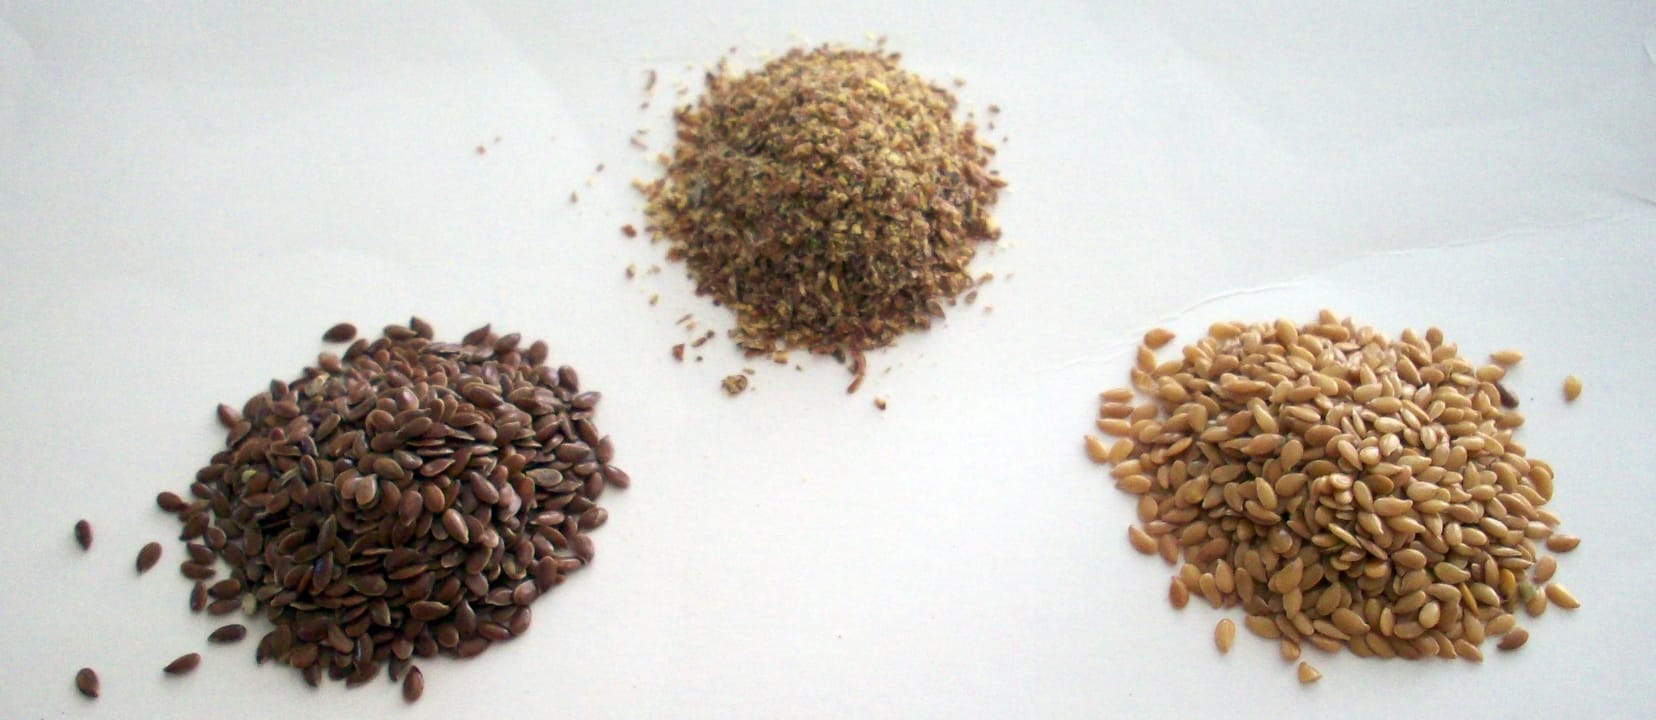 Preventing Breast Cancer with Flax Seeds